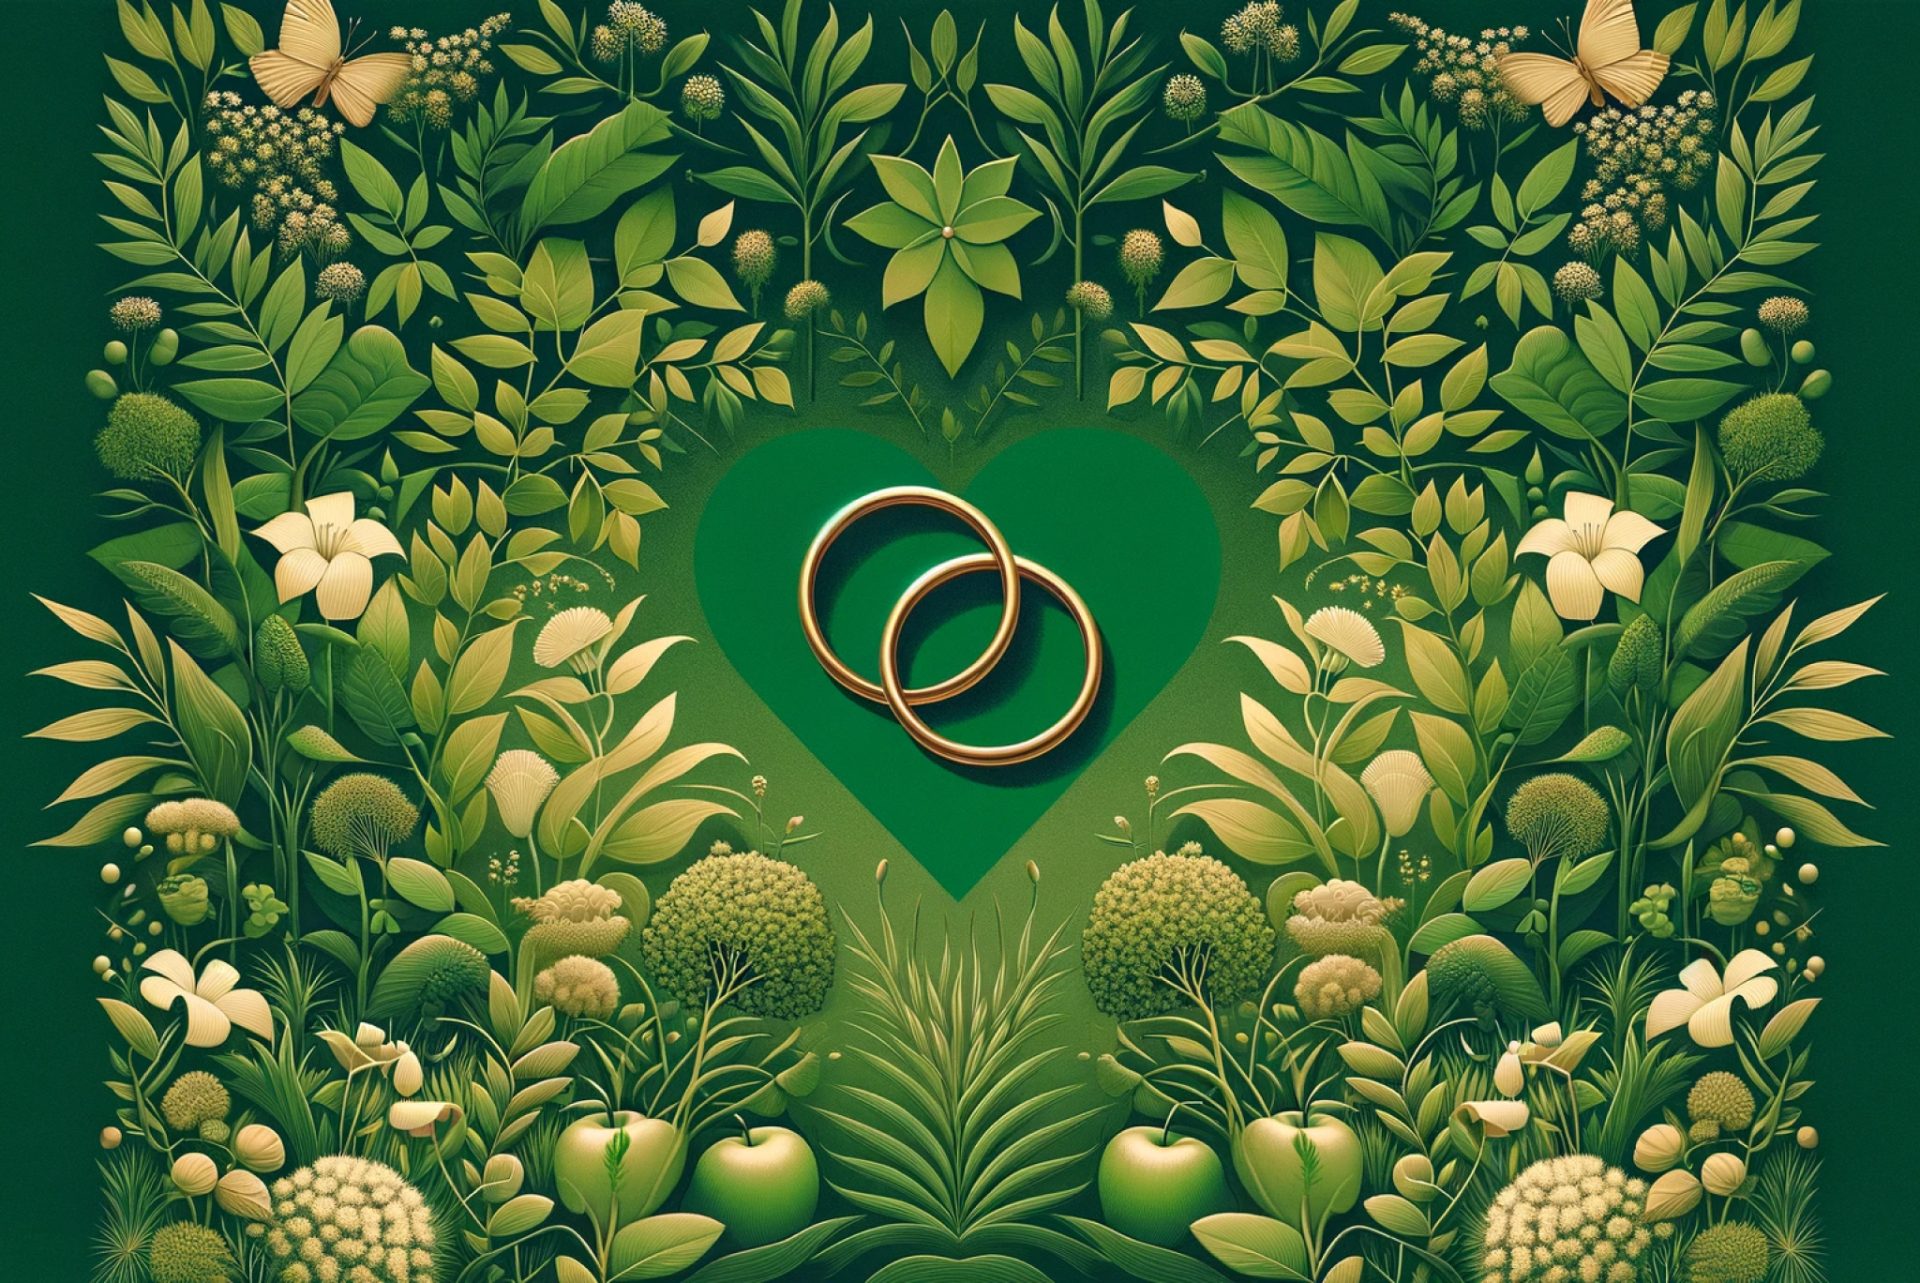 Stylised illustration of interlocked gold wedding rings surrounded by symmetrical, intricate arrangement of green foliage and fruits, evoking love, unity and natural beauty .